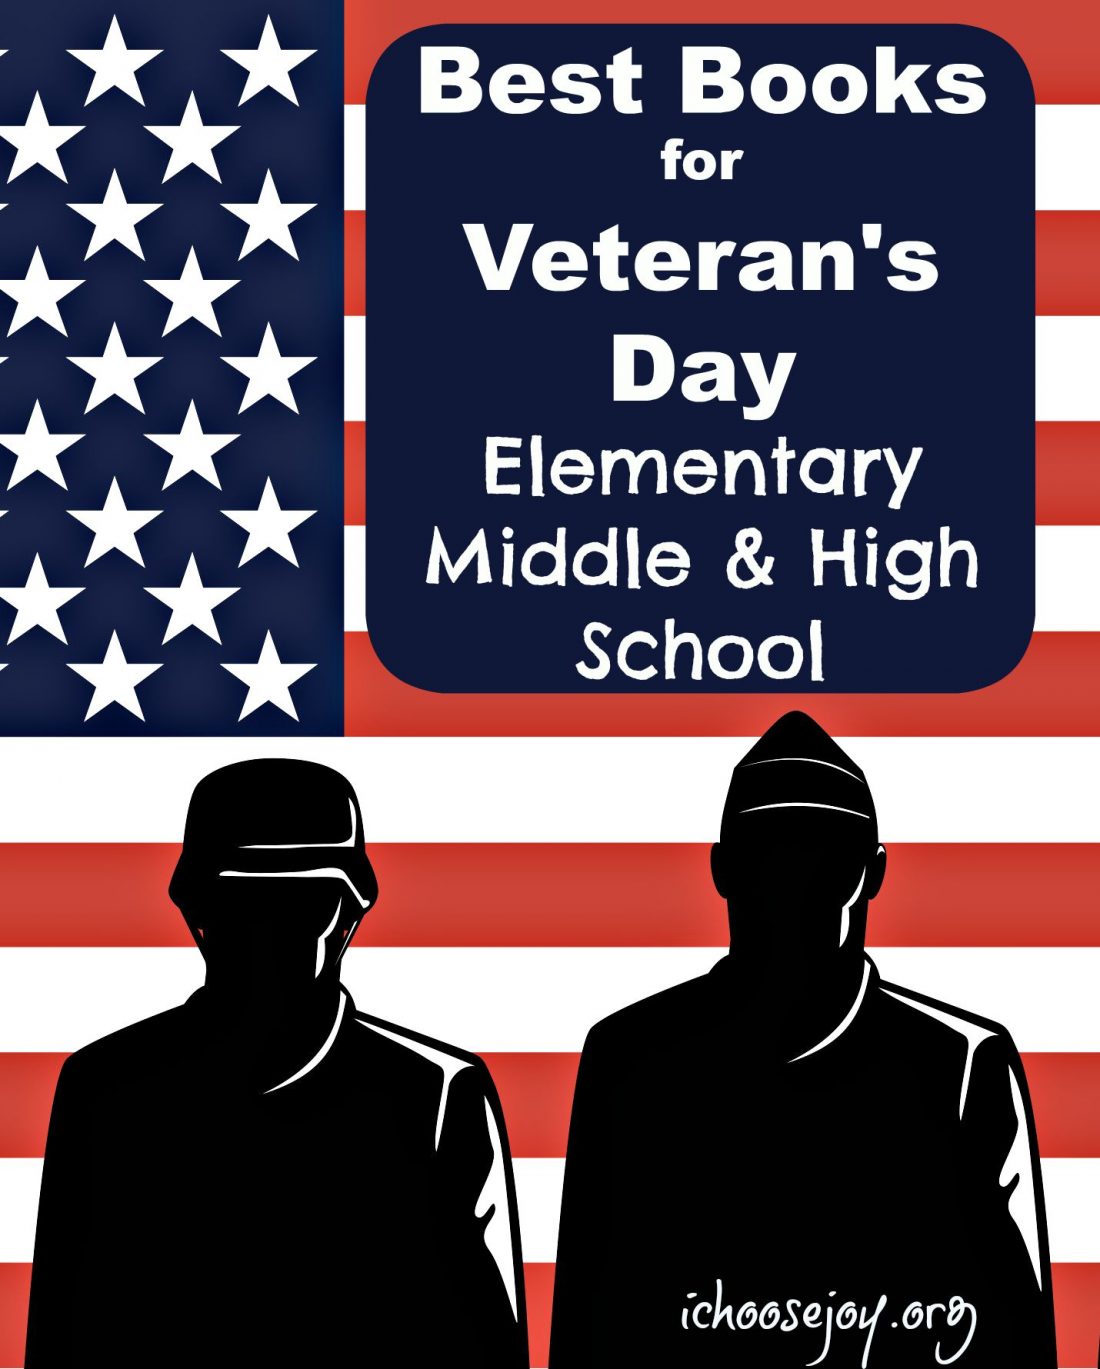 Veterans Day Book Ideas for Elementary, Middle, and High School